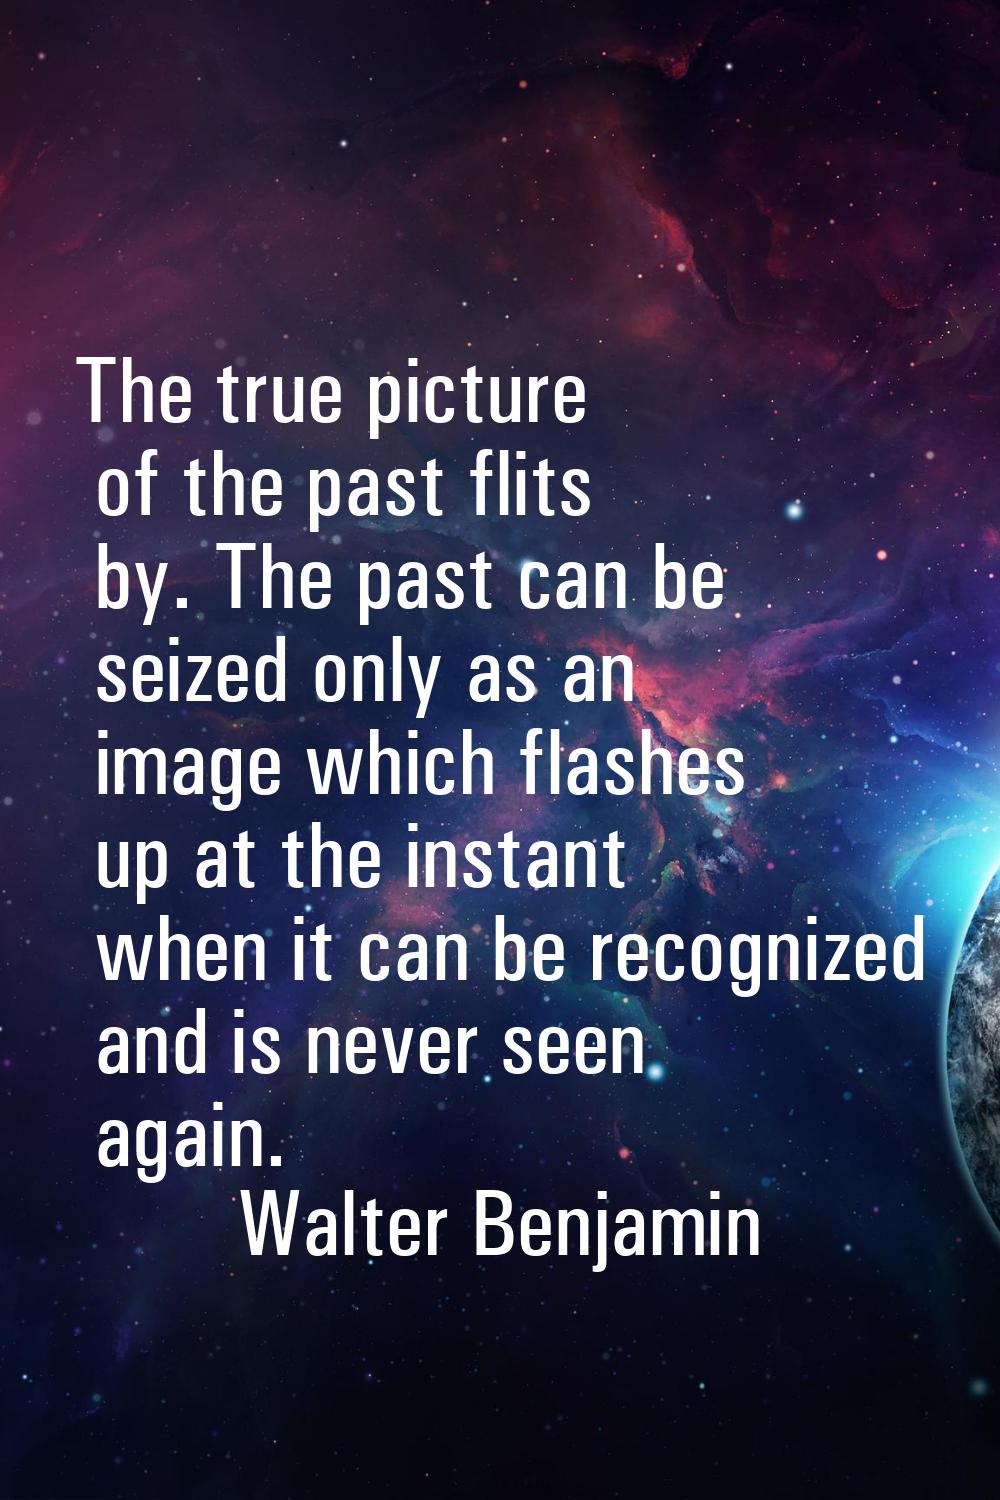 The true picture of the past flits by. The past can be seized only as an image which flashes up at 